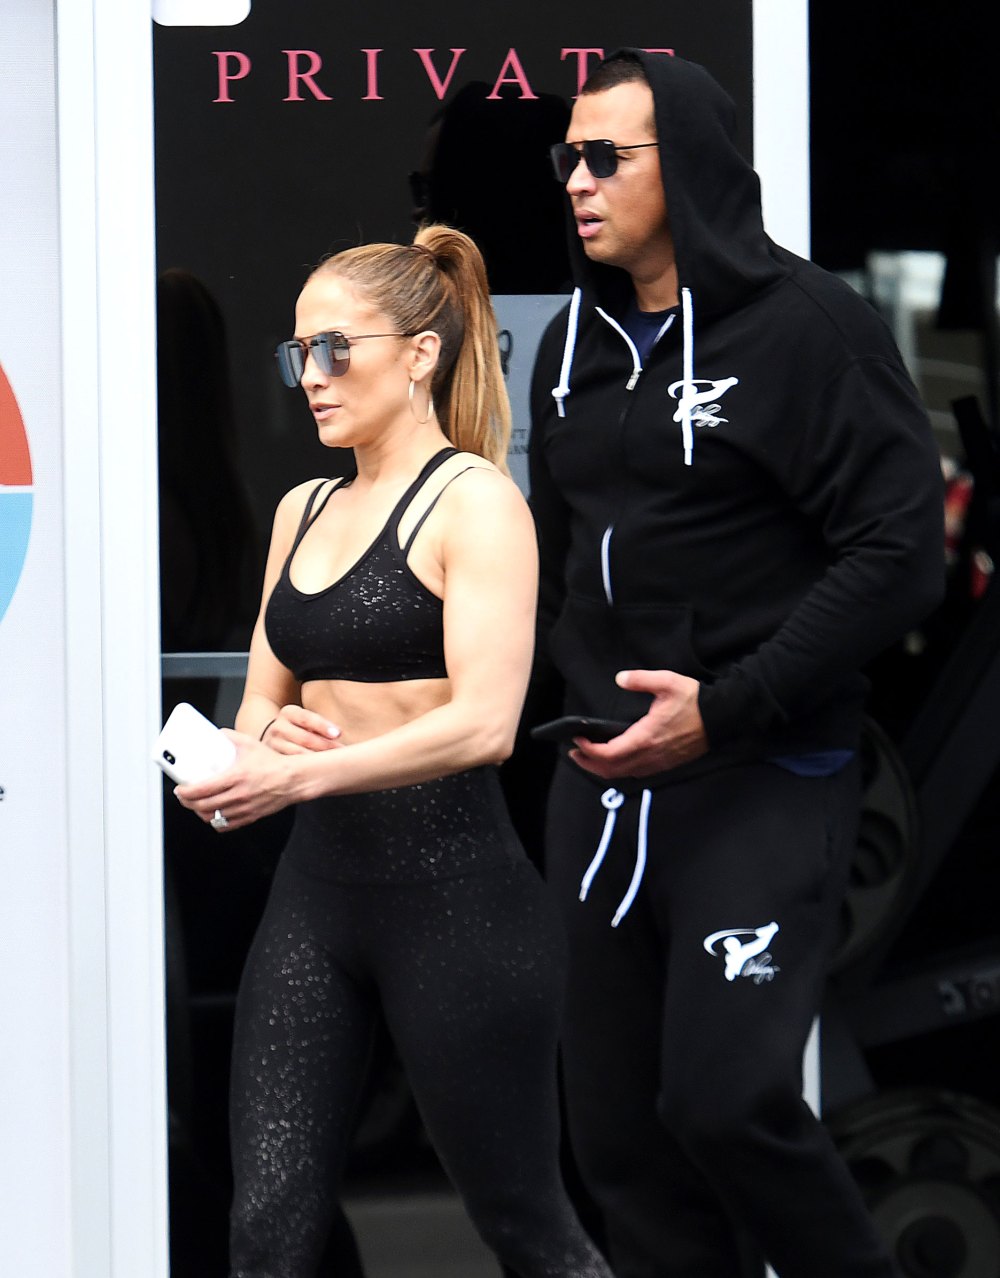 J.Lo’s Exact Diet and Abs Moves Are No Longer a Secret, Thanks to New Coach